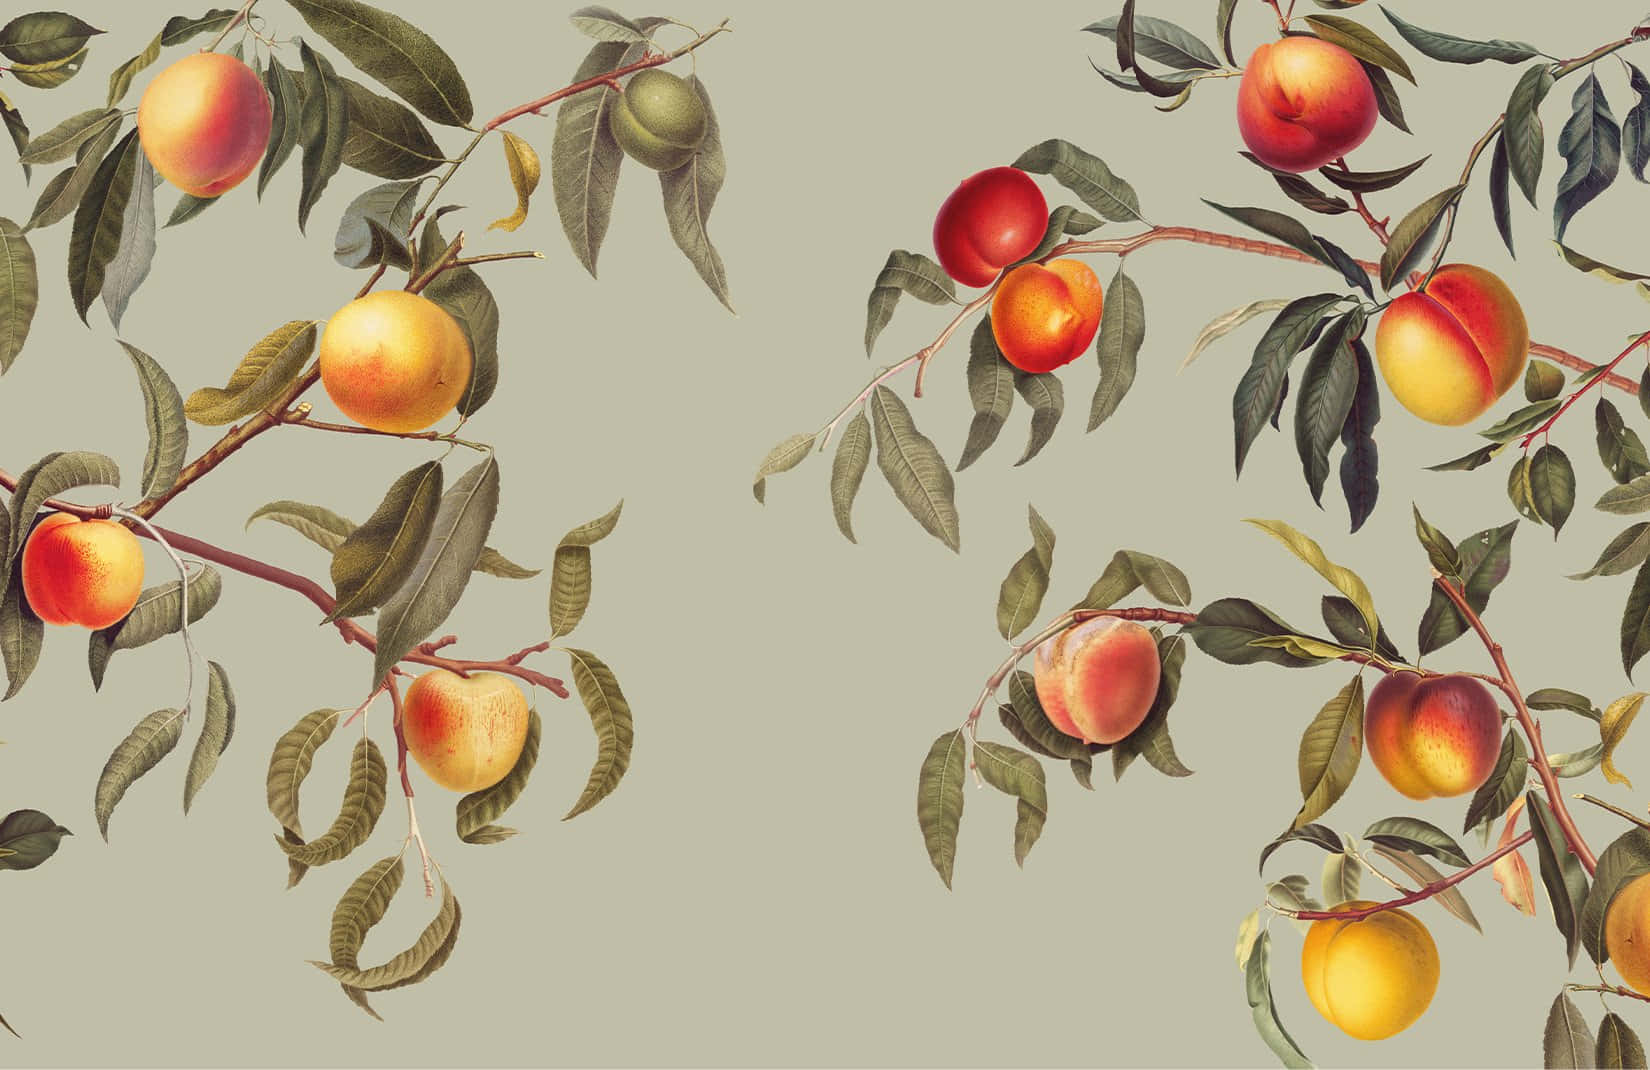 Enjoy the sweet and summer vibe with a glass of Vintage Peach Wallpaper